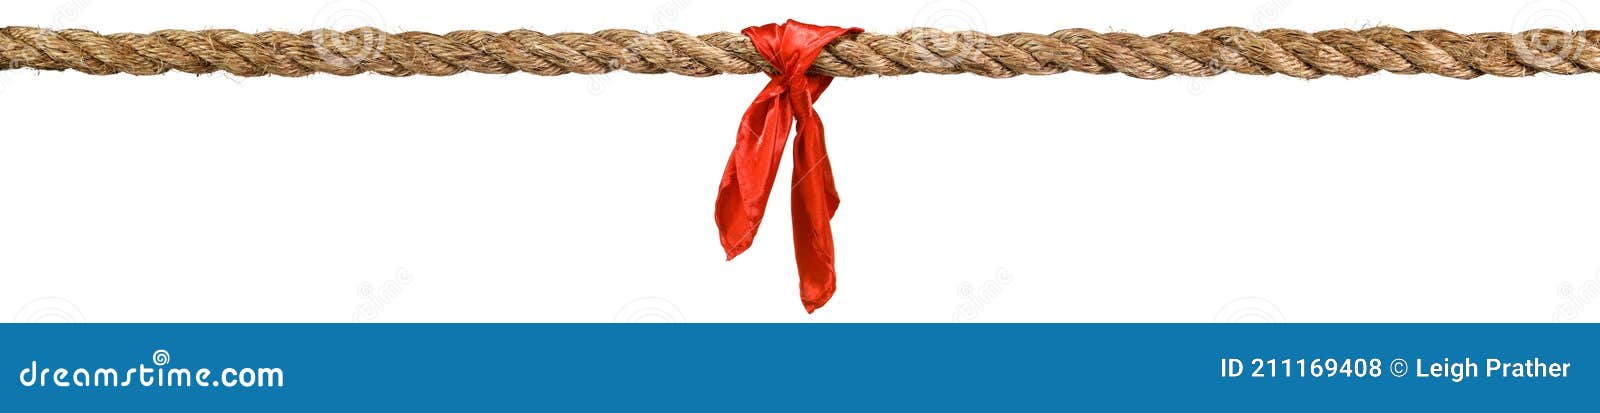 Long Tug of War Rope Pulled Tight, with Red Ribbon Tie. Concept of